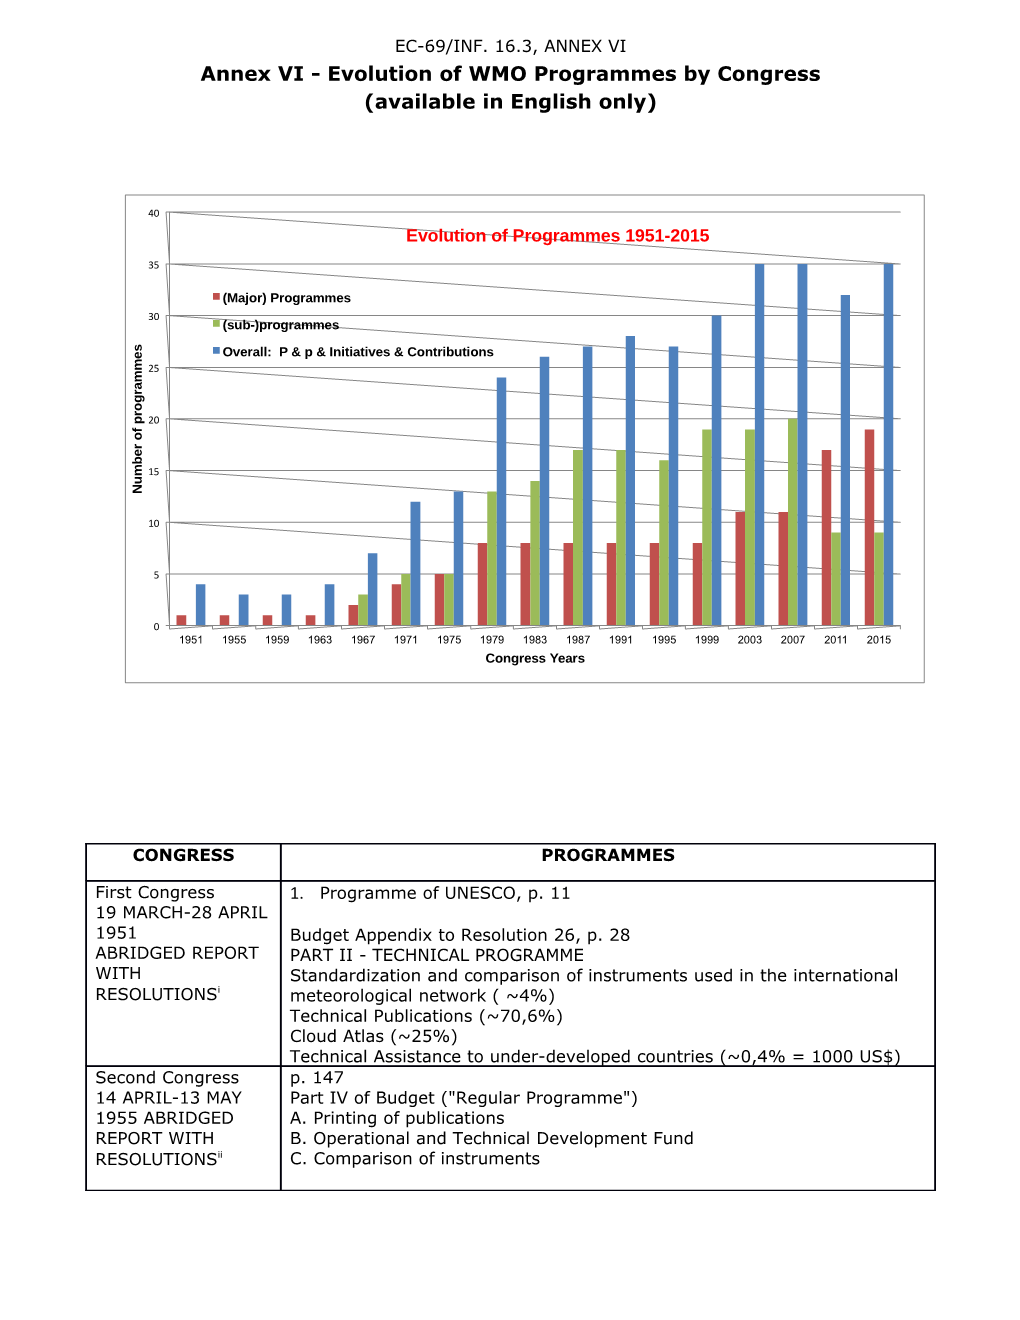 Annex VI - Evolution of WMO Programmes by Congress (Available in English Only)